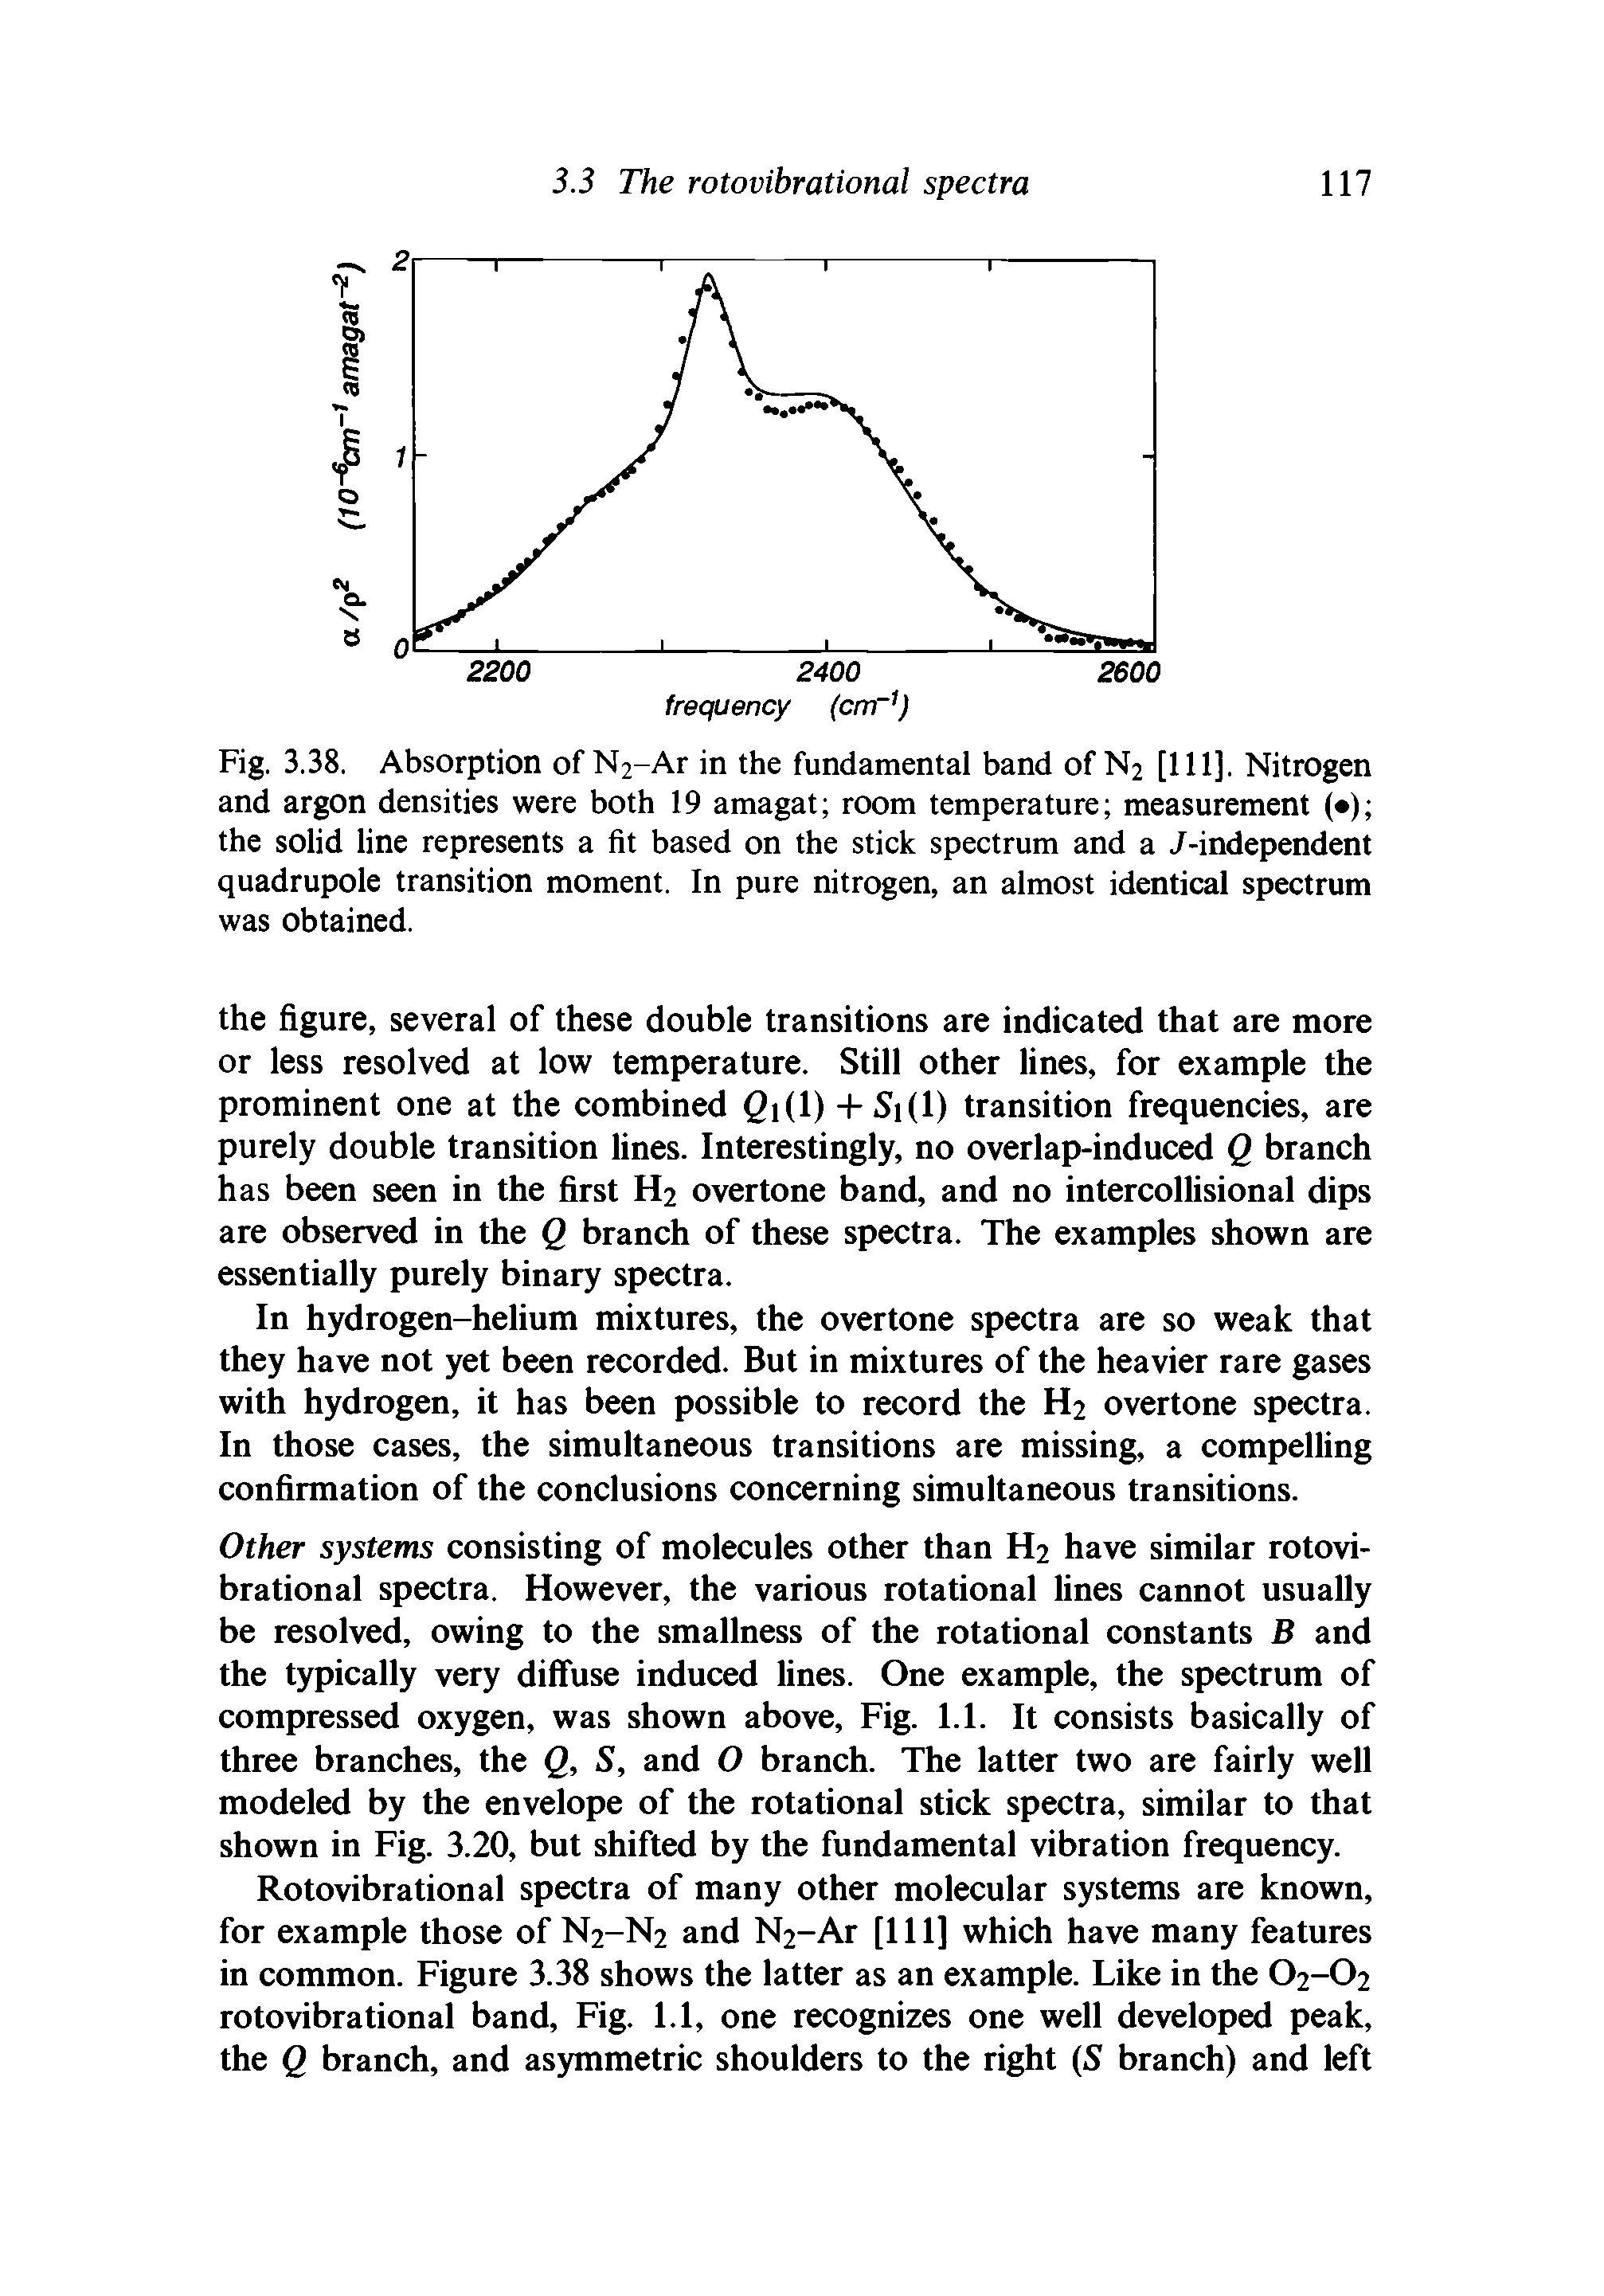 Fig. 3.38. Absorption of N2-Ar in the fundamental band of N2 [111]. Nitrogen and argon densities were both 19 amagat room temperature measurement ( ) the solid line represents a fit based on the stick spectrum and a J-independent quadrupole transition moment. In pure nitrogen, an almost identical spectrum was obtained.